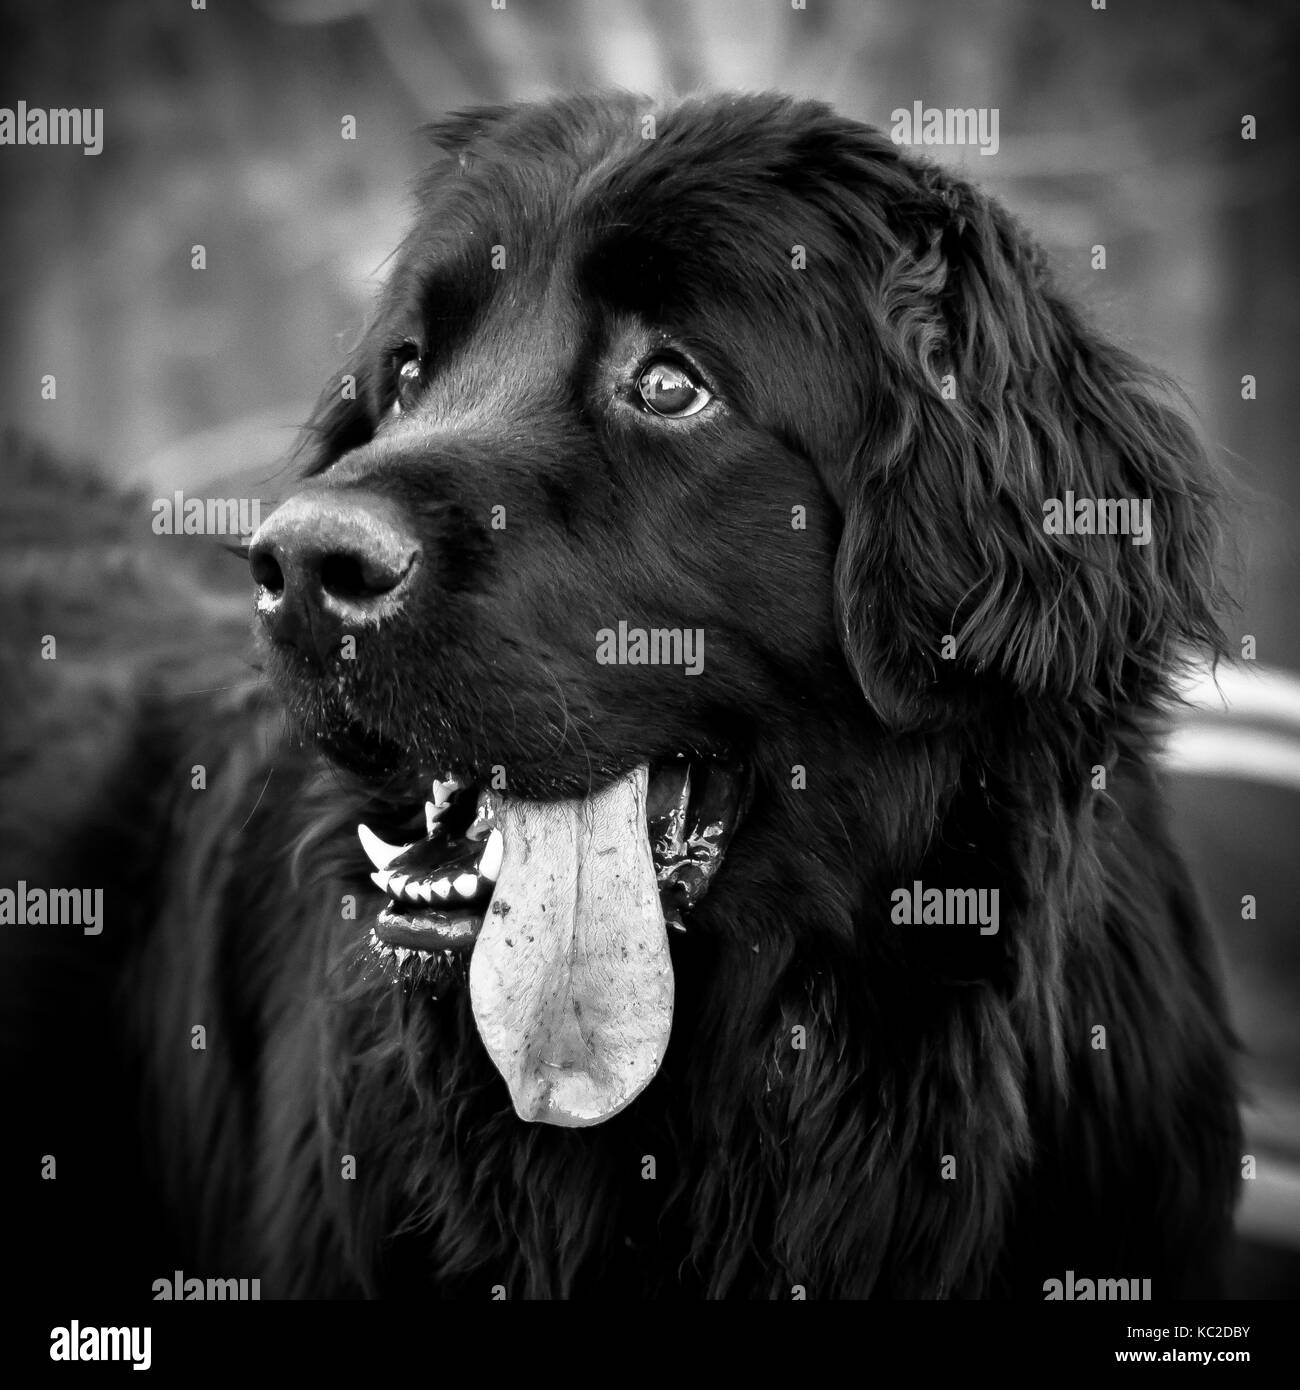 Black and white head shot of a playful black newfoundland dog with tongue sticking out. Stock Photo